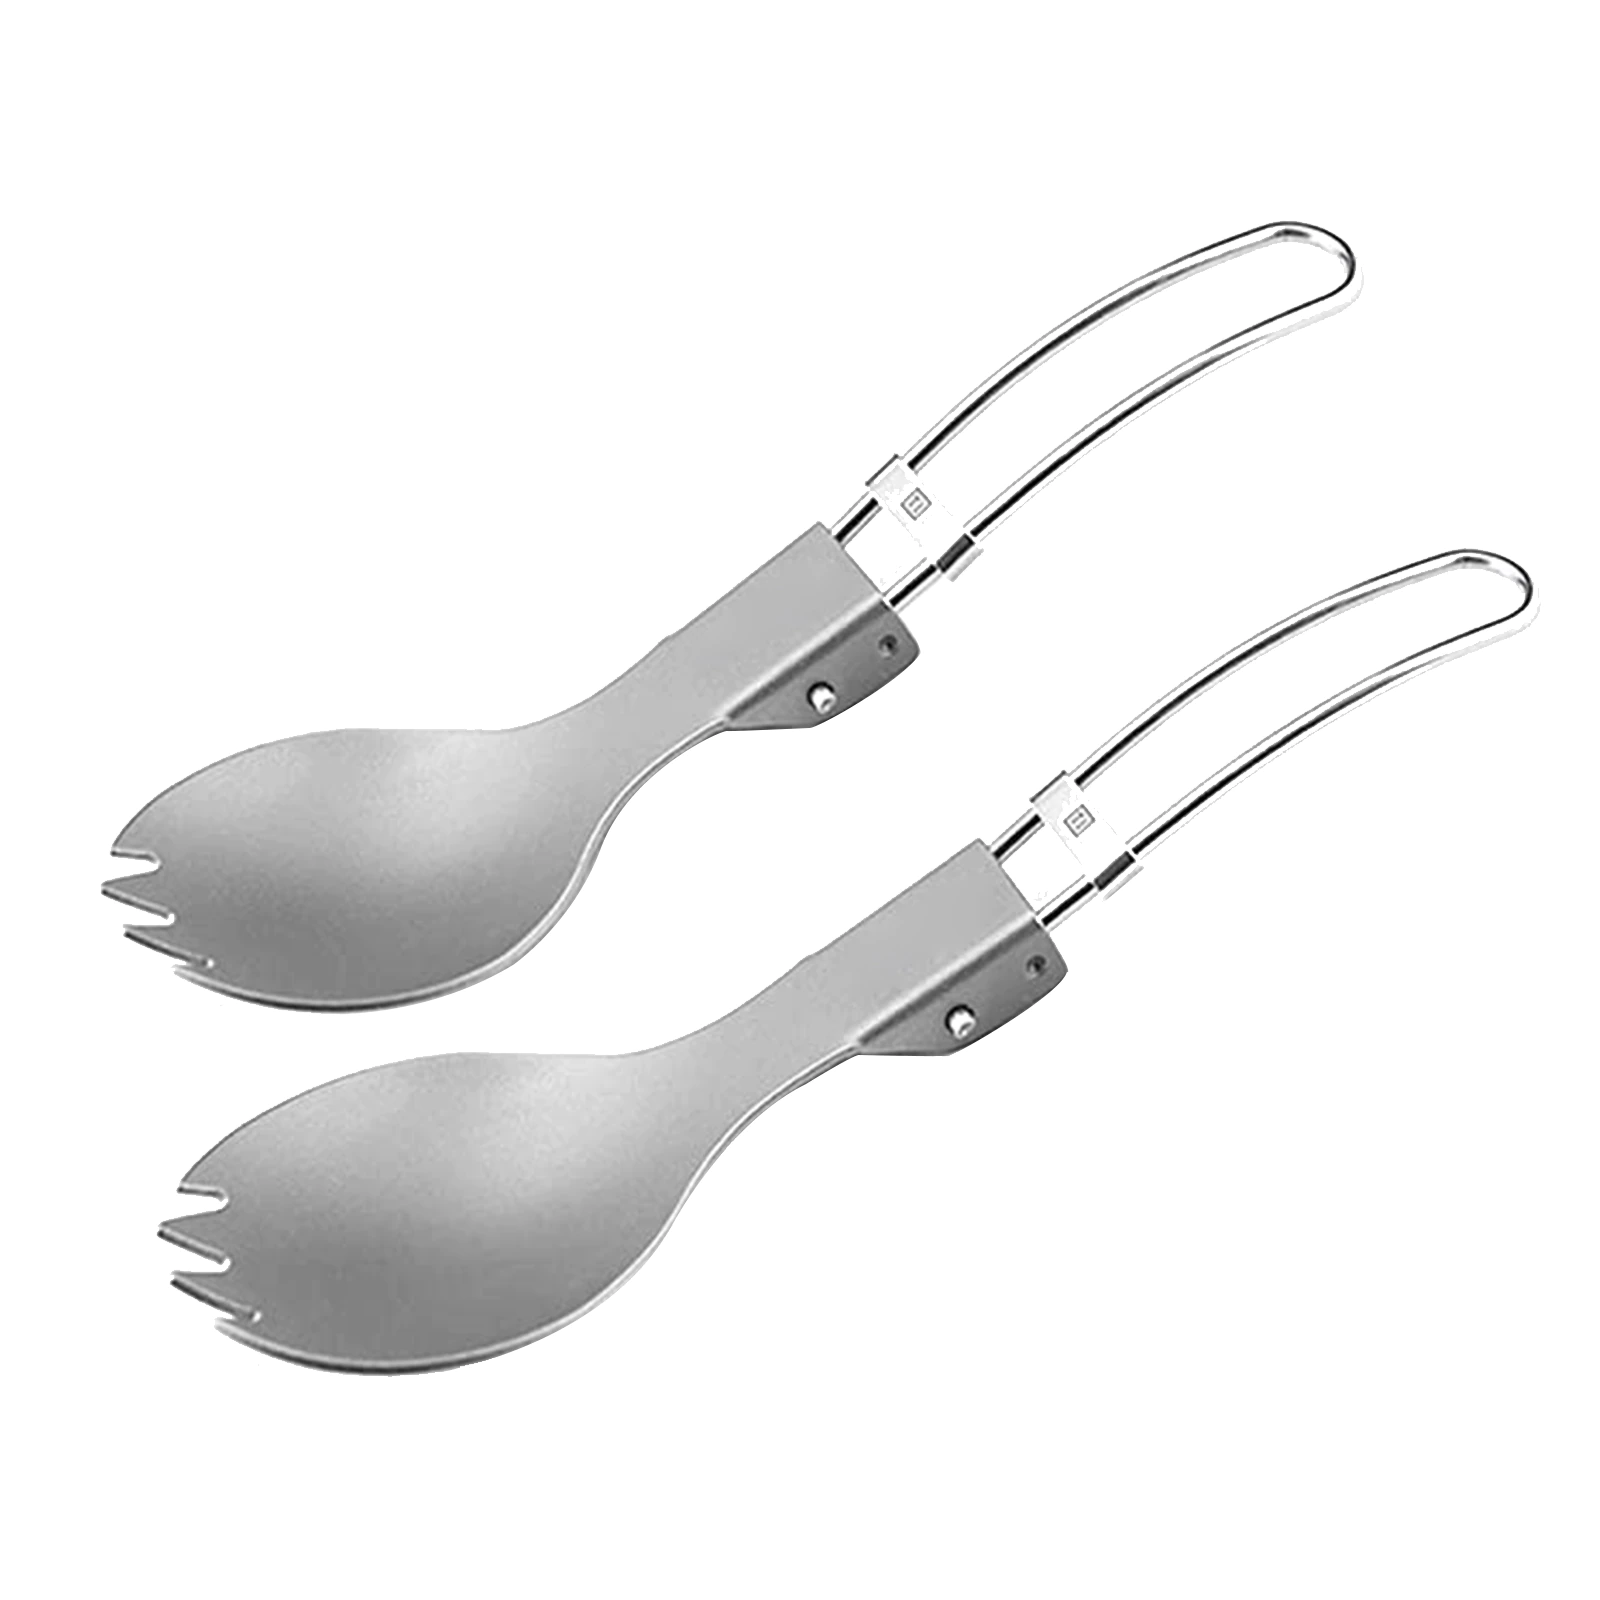 2pcs Folding Titanium Fork Camping Spoon Outdoor Tableware, Picnic And Hiking, Household Tableware Ultra-light 2pcs Set